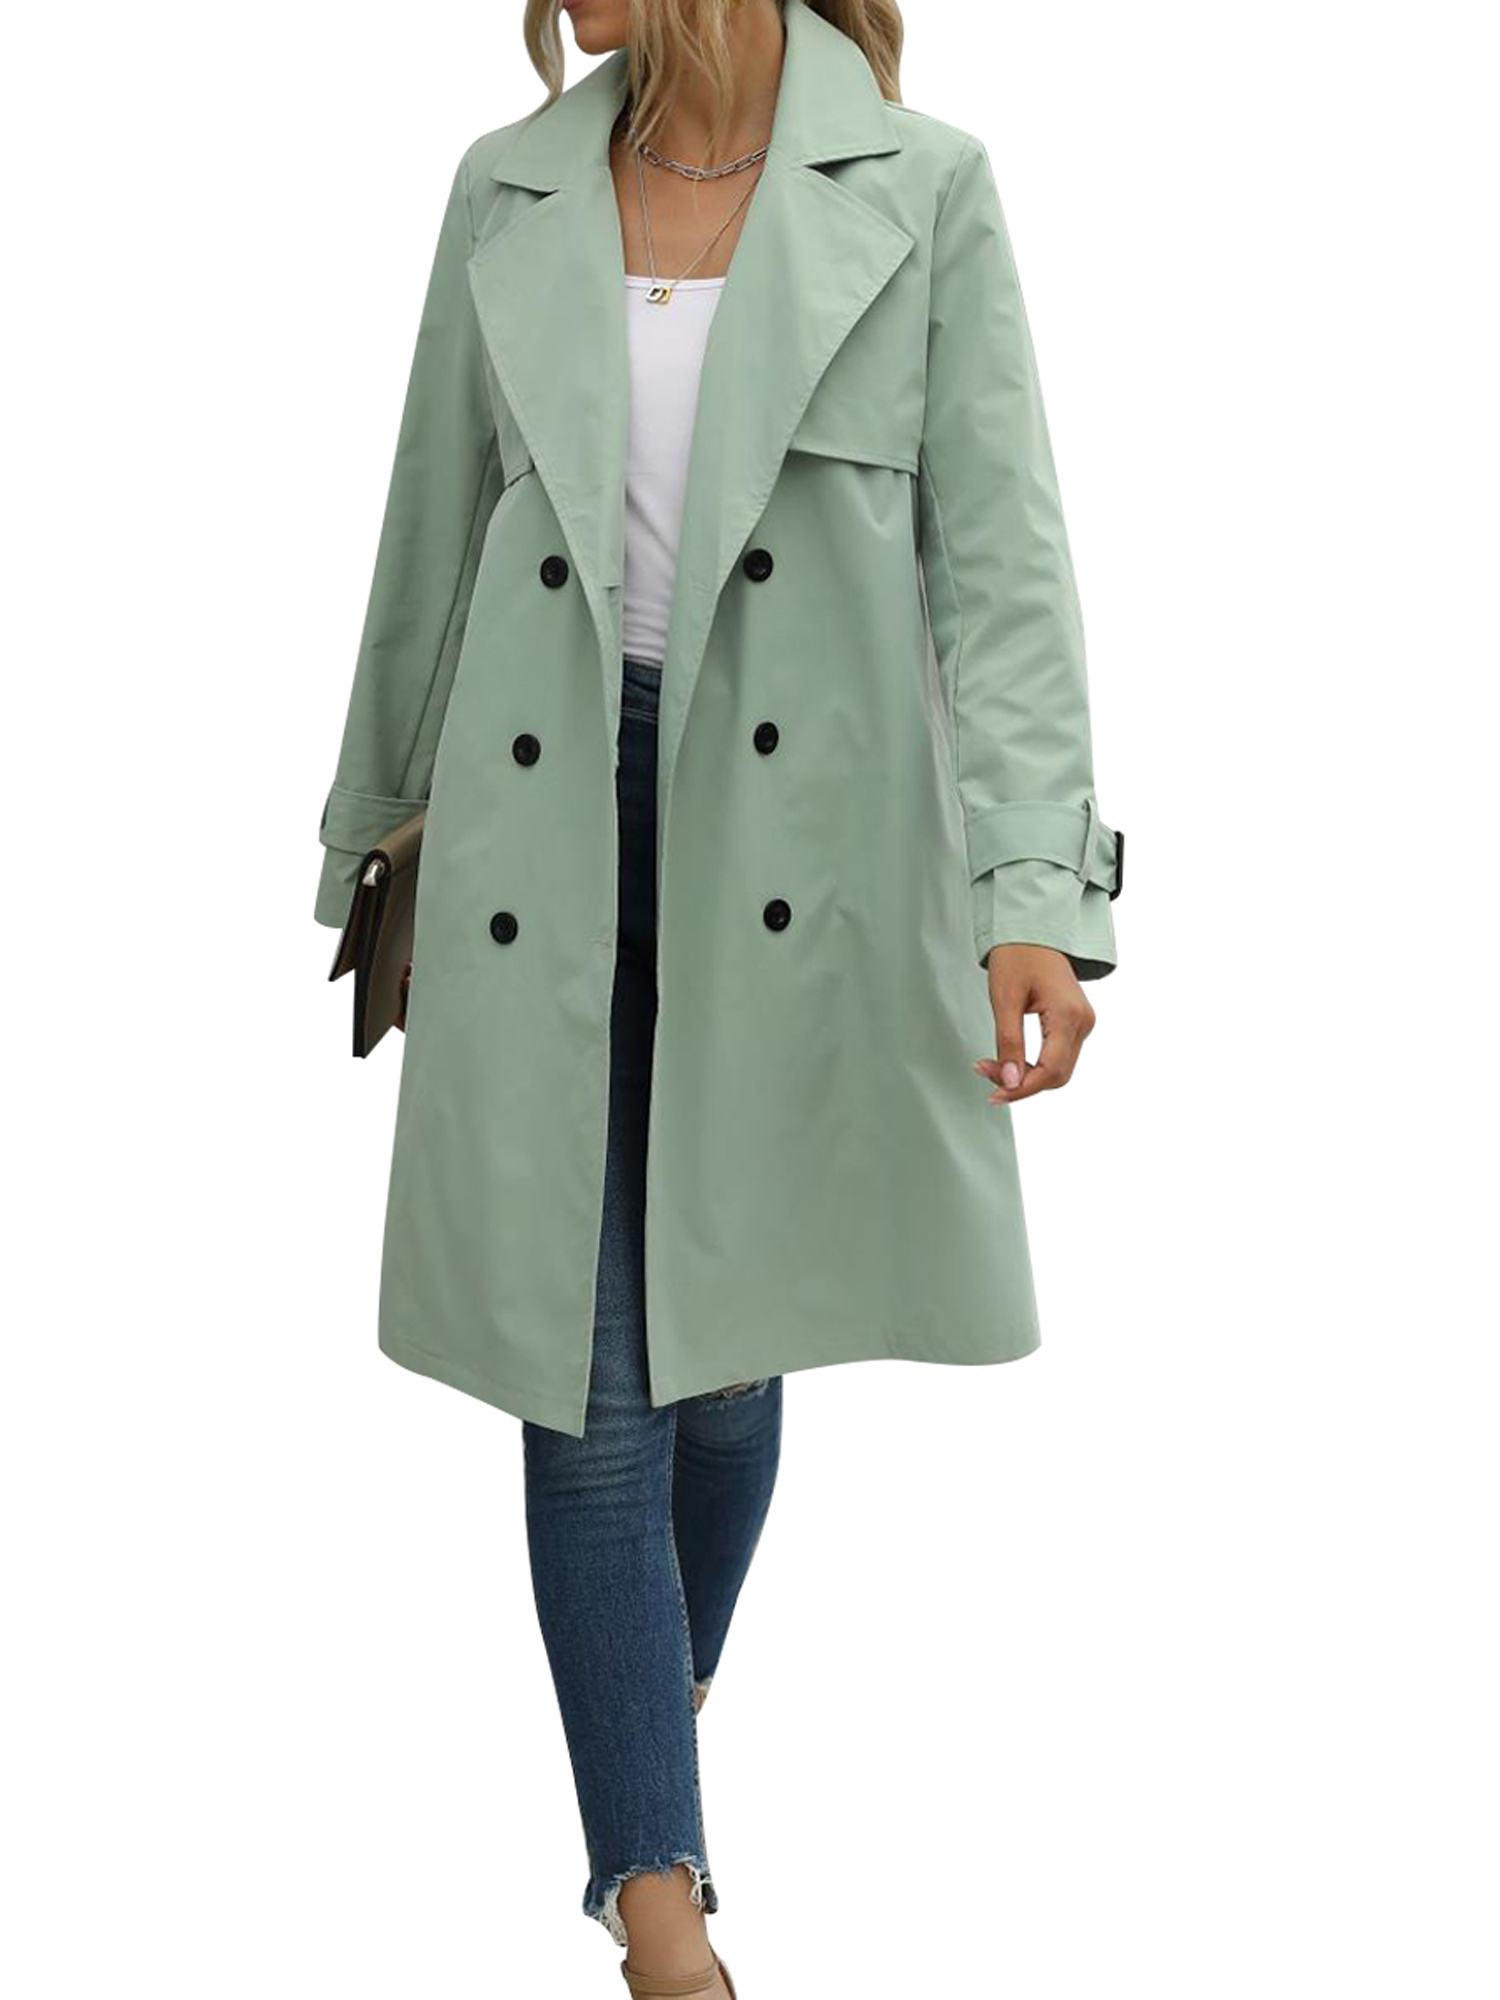 Spring hue Women Jacket Long Sleeve Lapel Double Breasted Belted Trench Coat - image 1 of 6